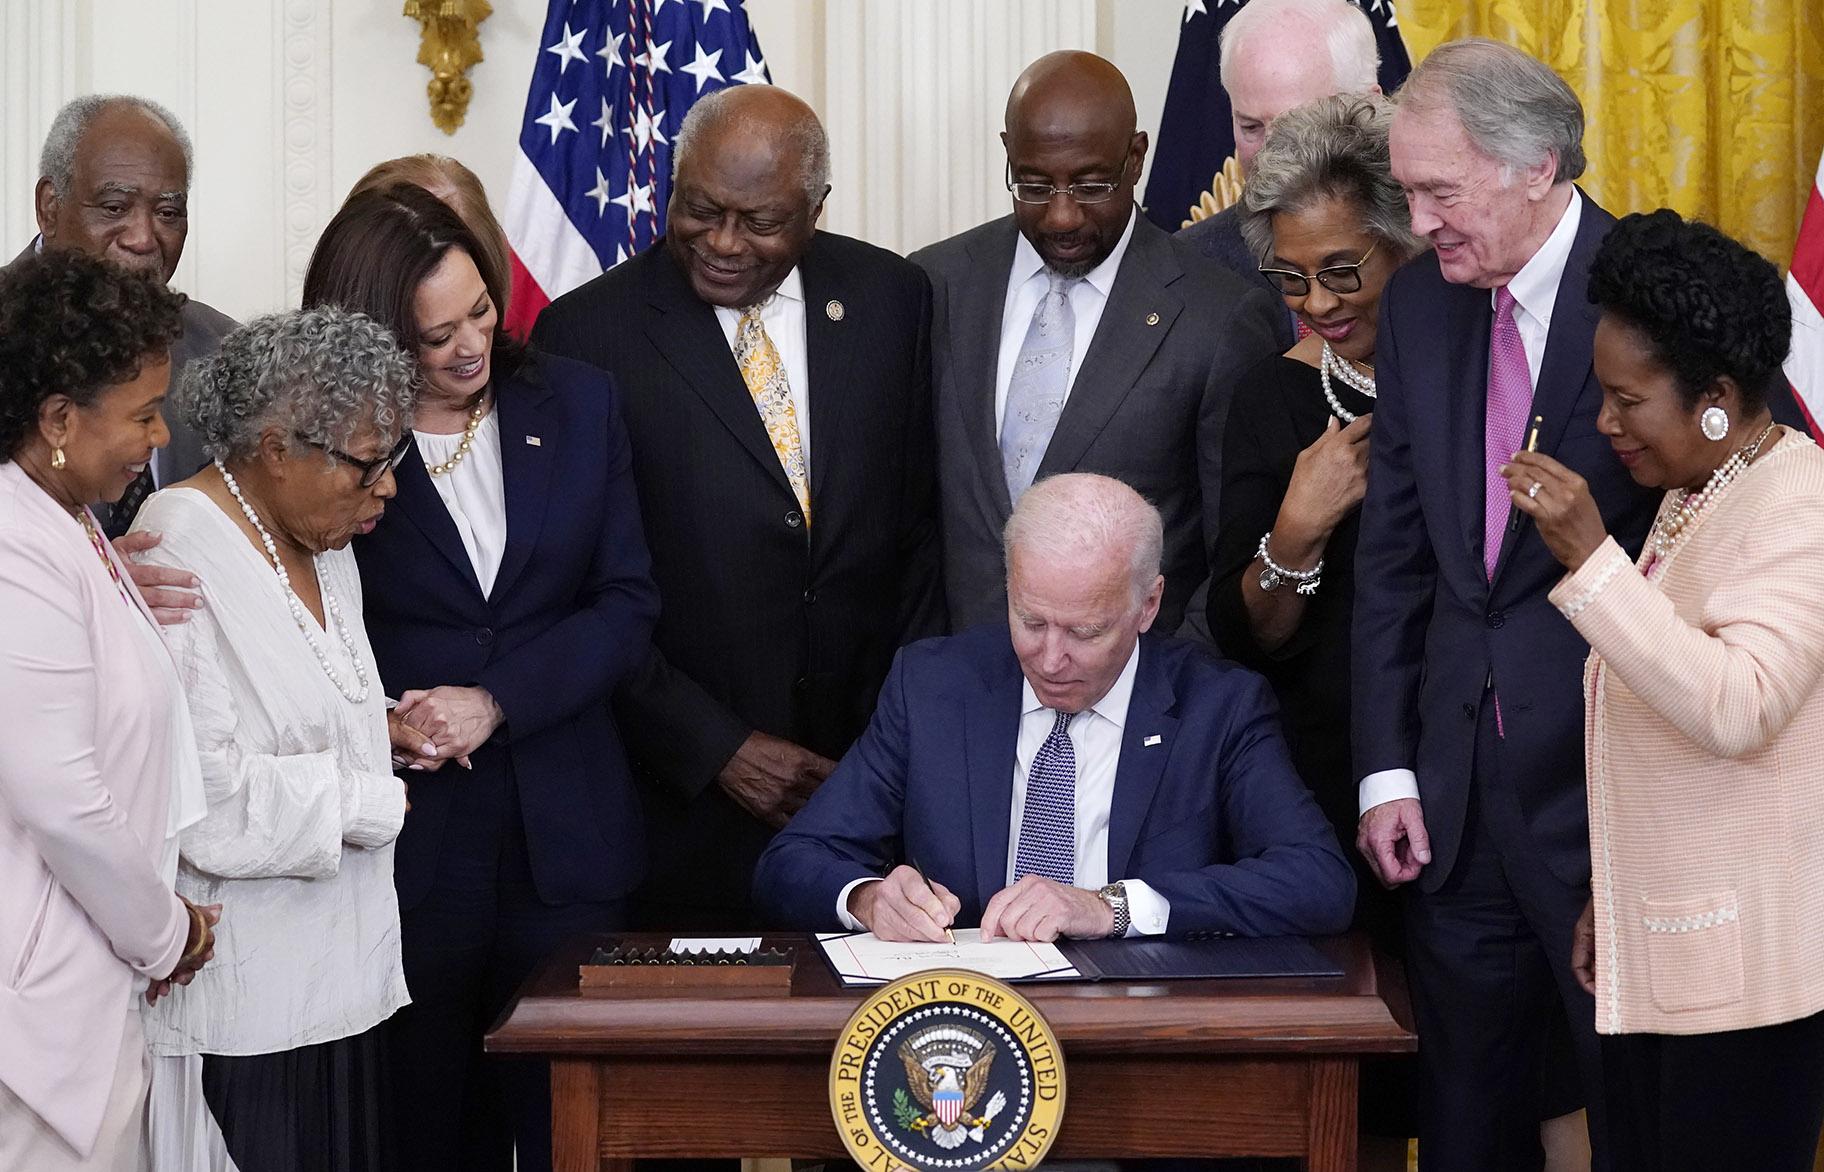 President Joe Biden signs the Juneteenth National Independence Day Act, in the East Room of the White House, Thursday, June 17, 2021, in Washington. (AP Photo / Evan Vucci)